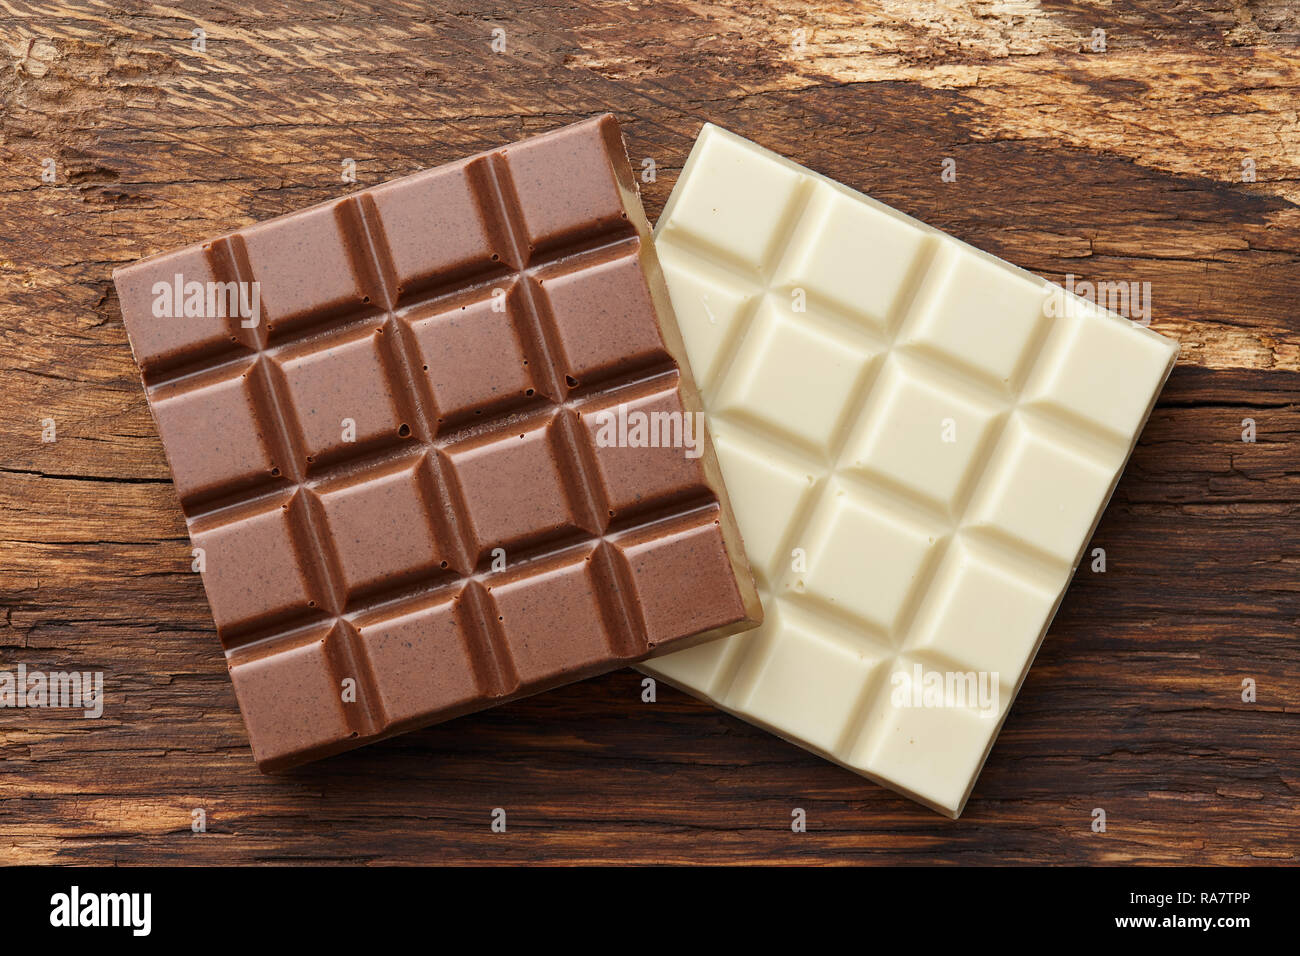 Milk and white chocolate bars on wooden background Stock Photo